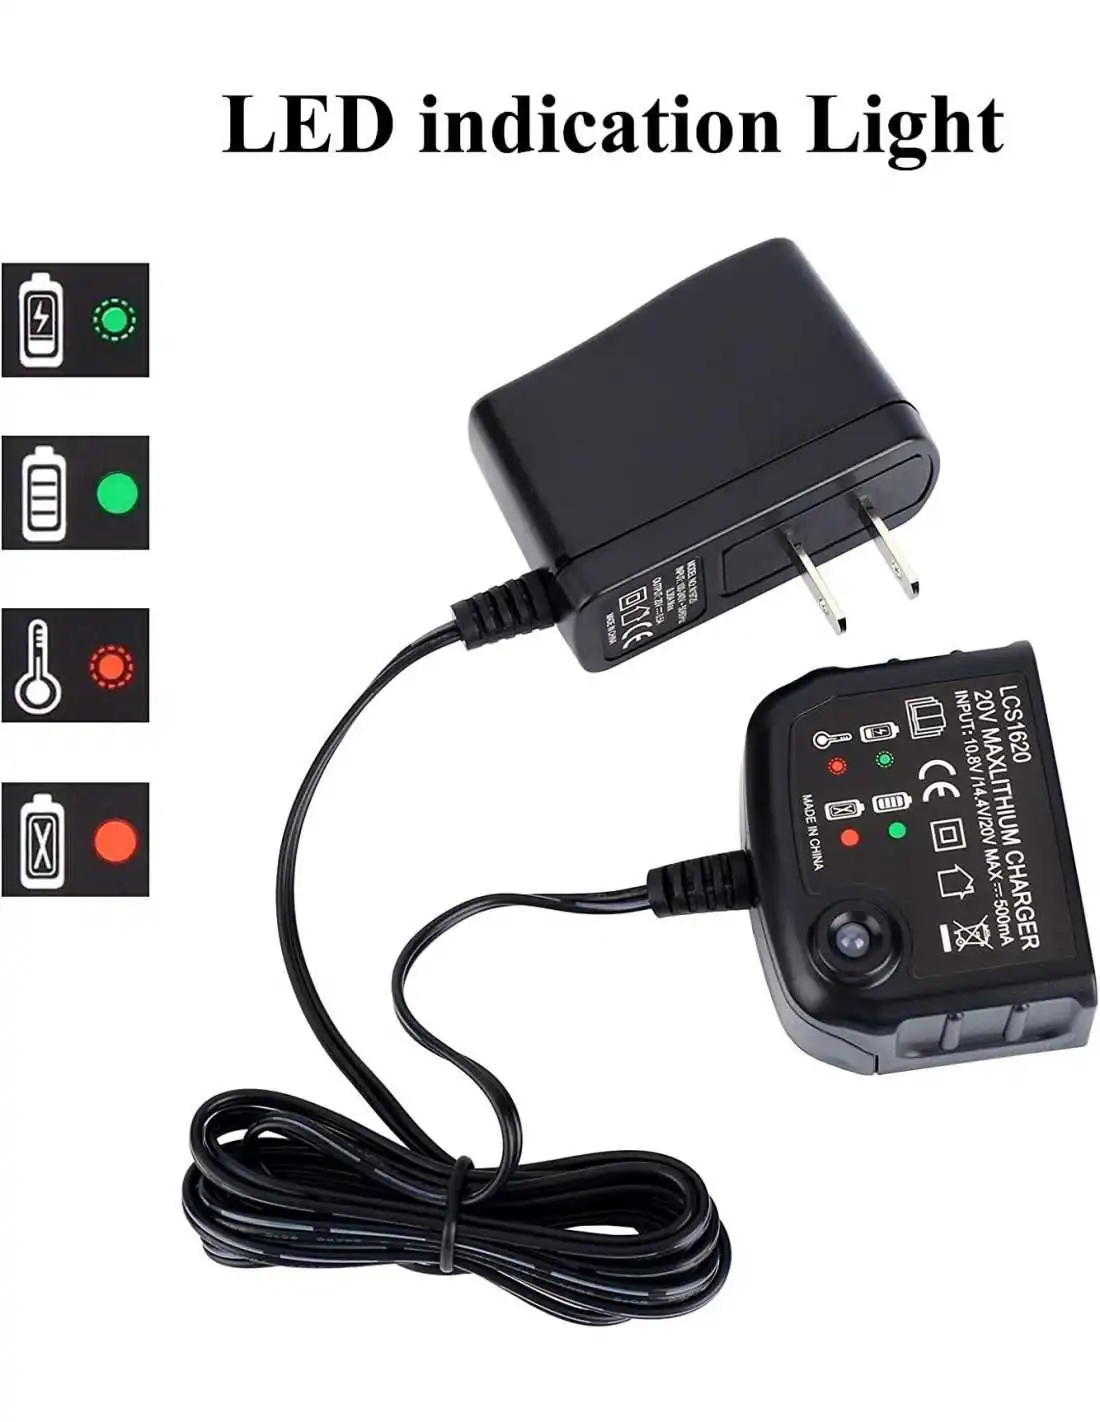 Hot Li-ion Battery Charger Adapter Lcs1620 For Black&decker 10.8v